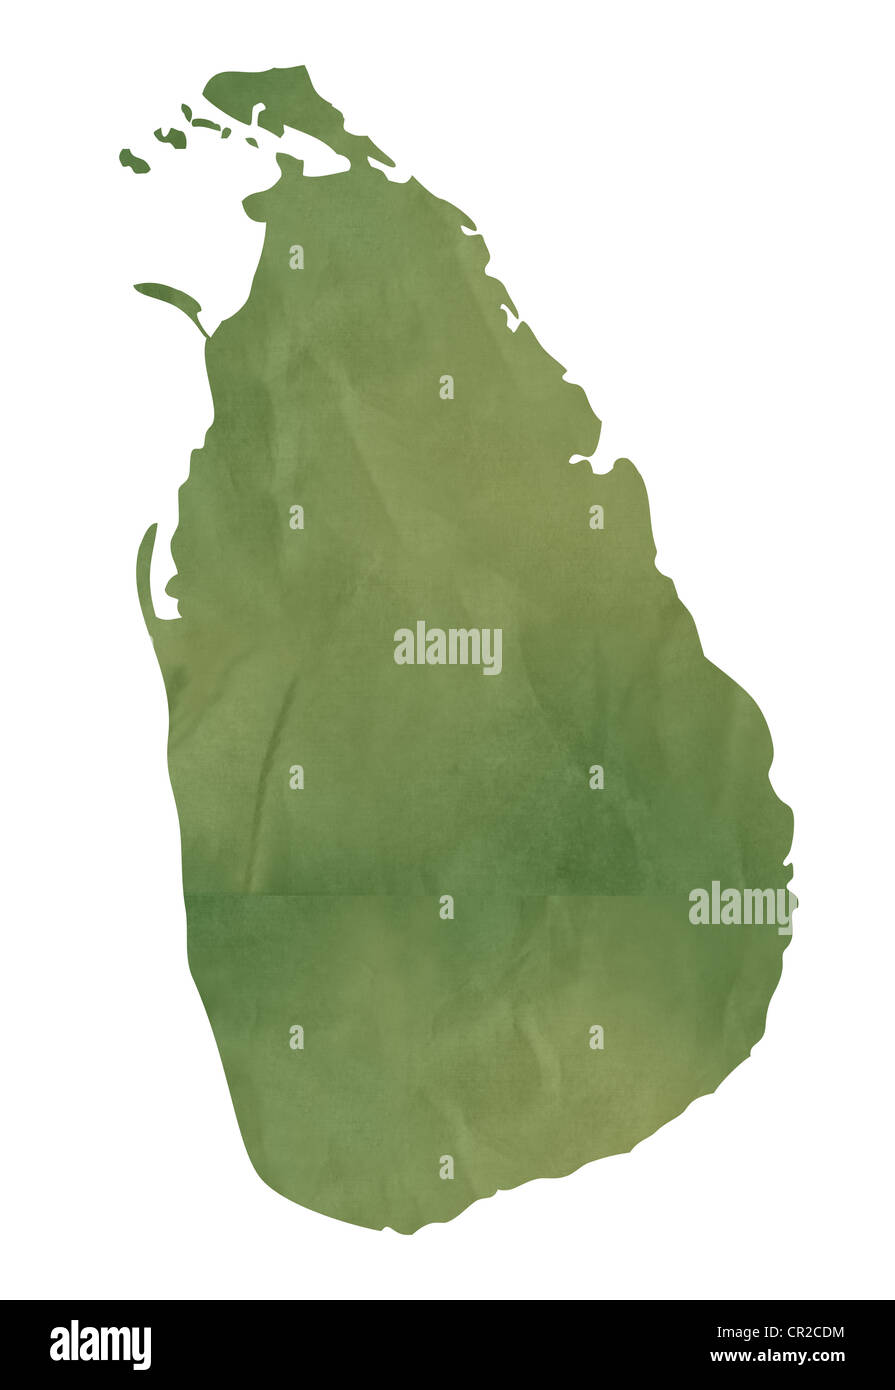 Old green map of Sri Lanka in textured green paper, isolated on white background. Stock Photo